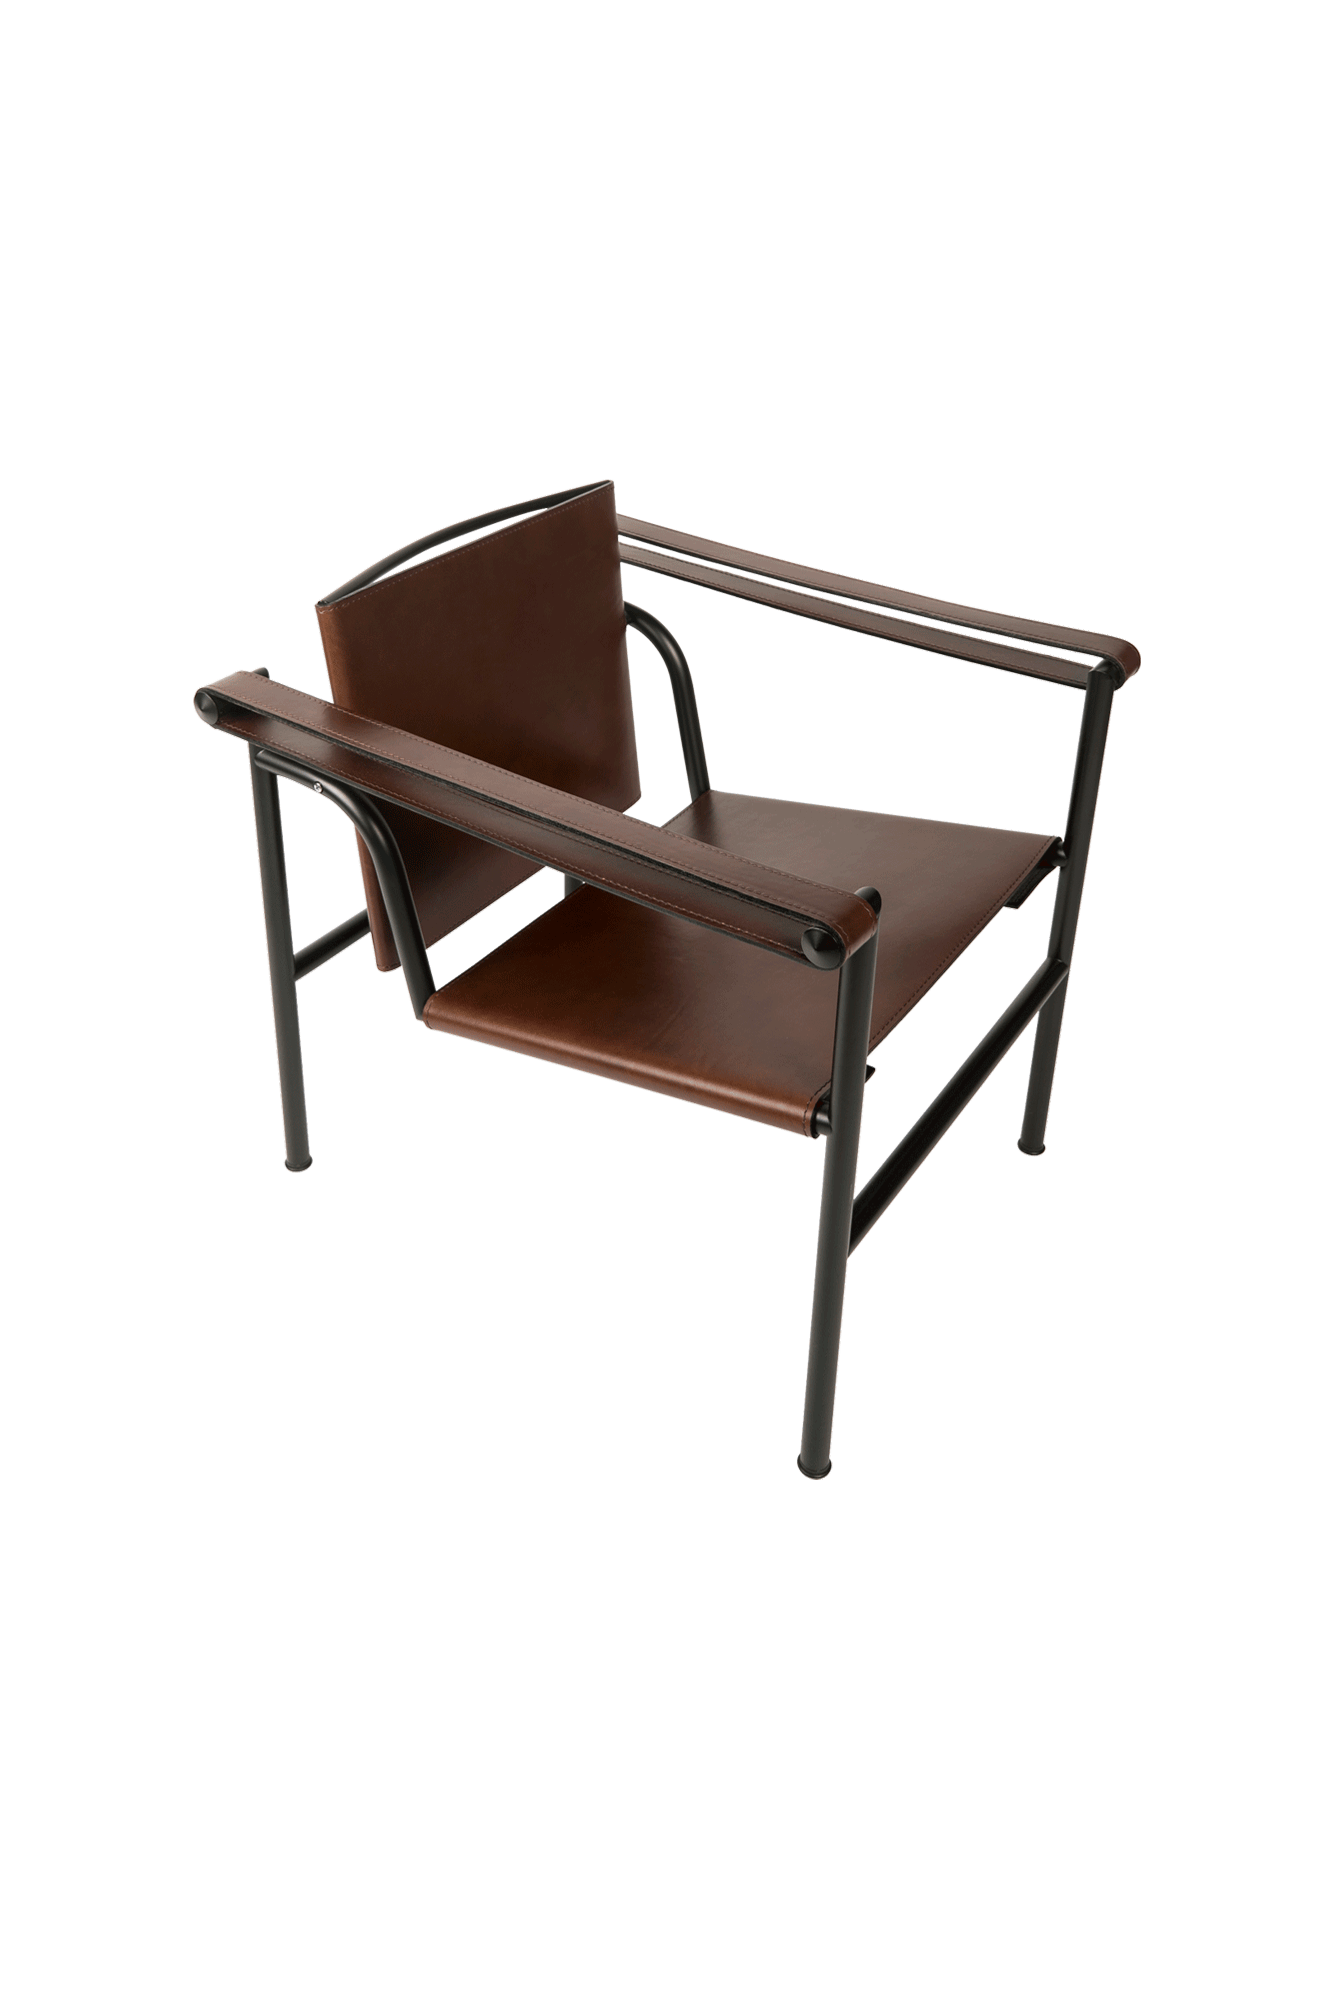 1 Fauteuil Dossier Basculant by Le Corbusier, P. Jeanneret, C. Perriand